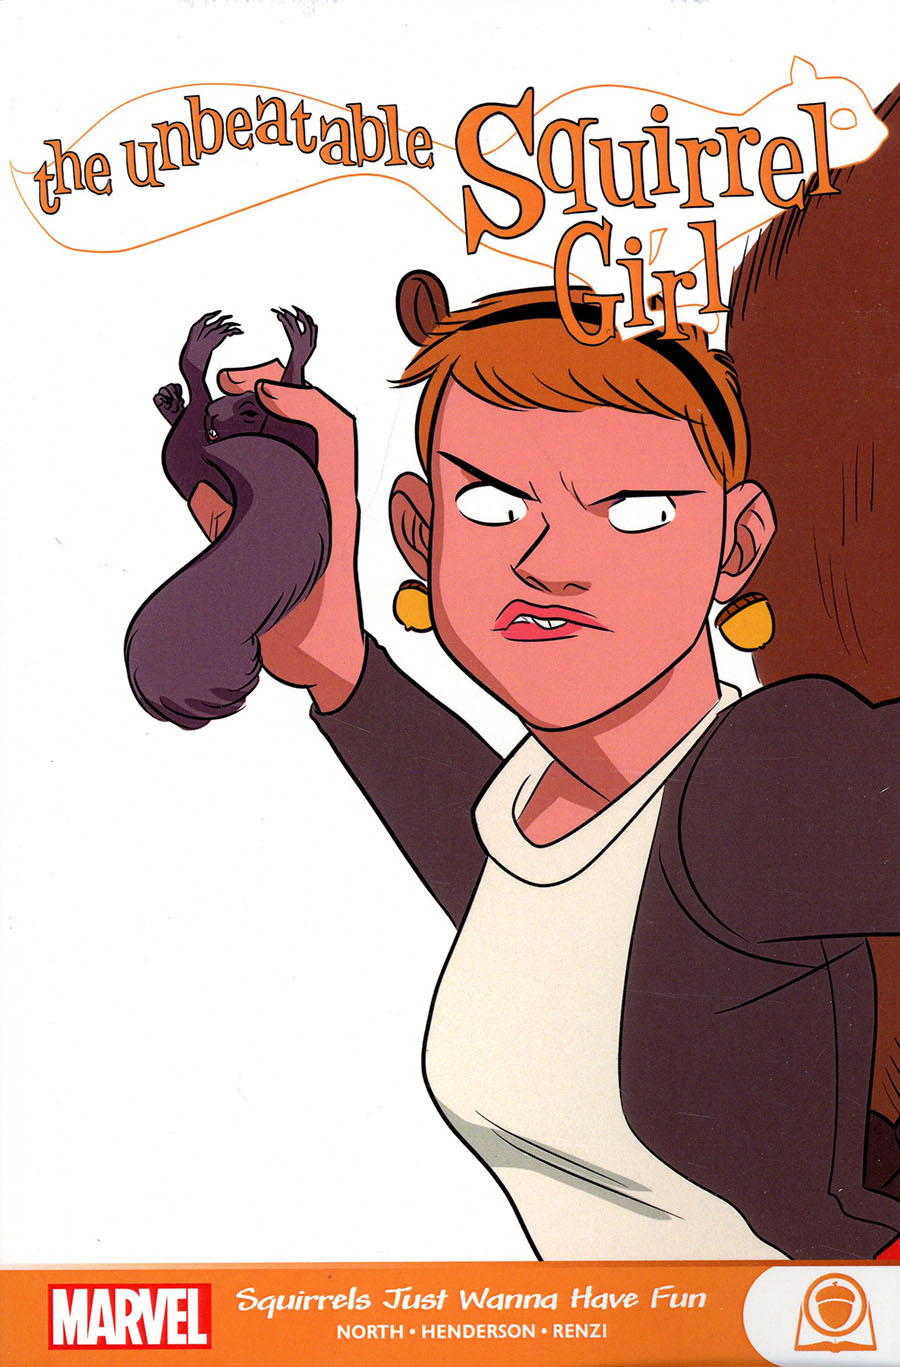 Unbeatable Squirrel Girl Squirrels Just Wanna Have Fun GN